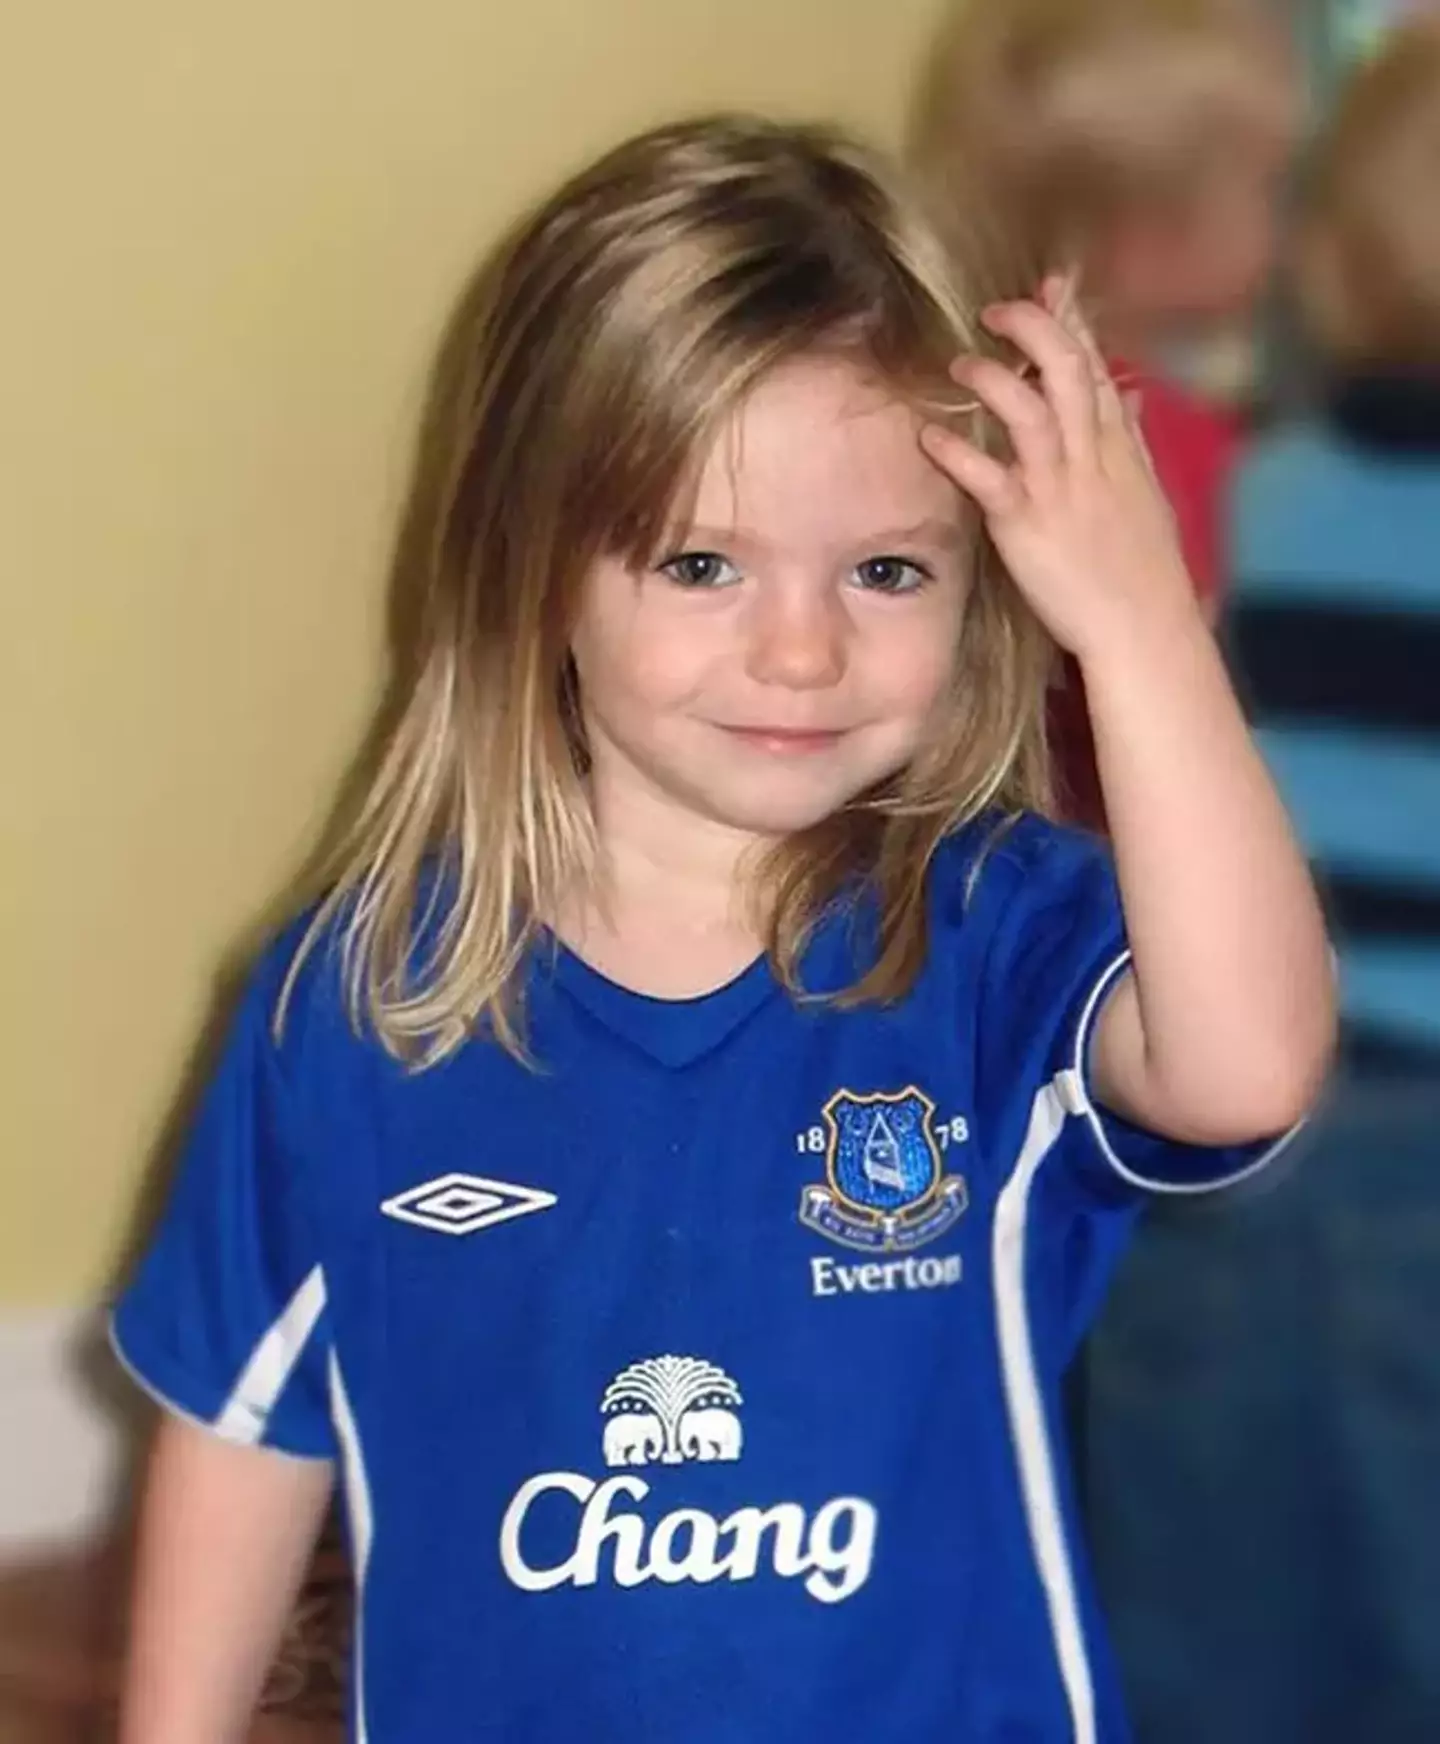 Madeleine McCann went missing in 2007 and investigators have been told that she may have been alive for 'two to three days' before she died.